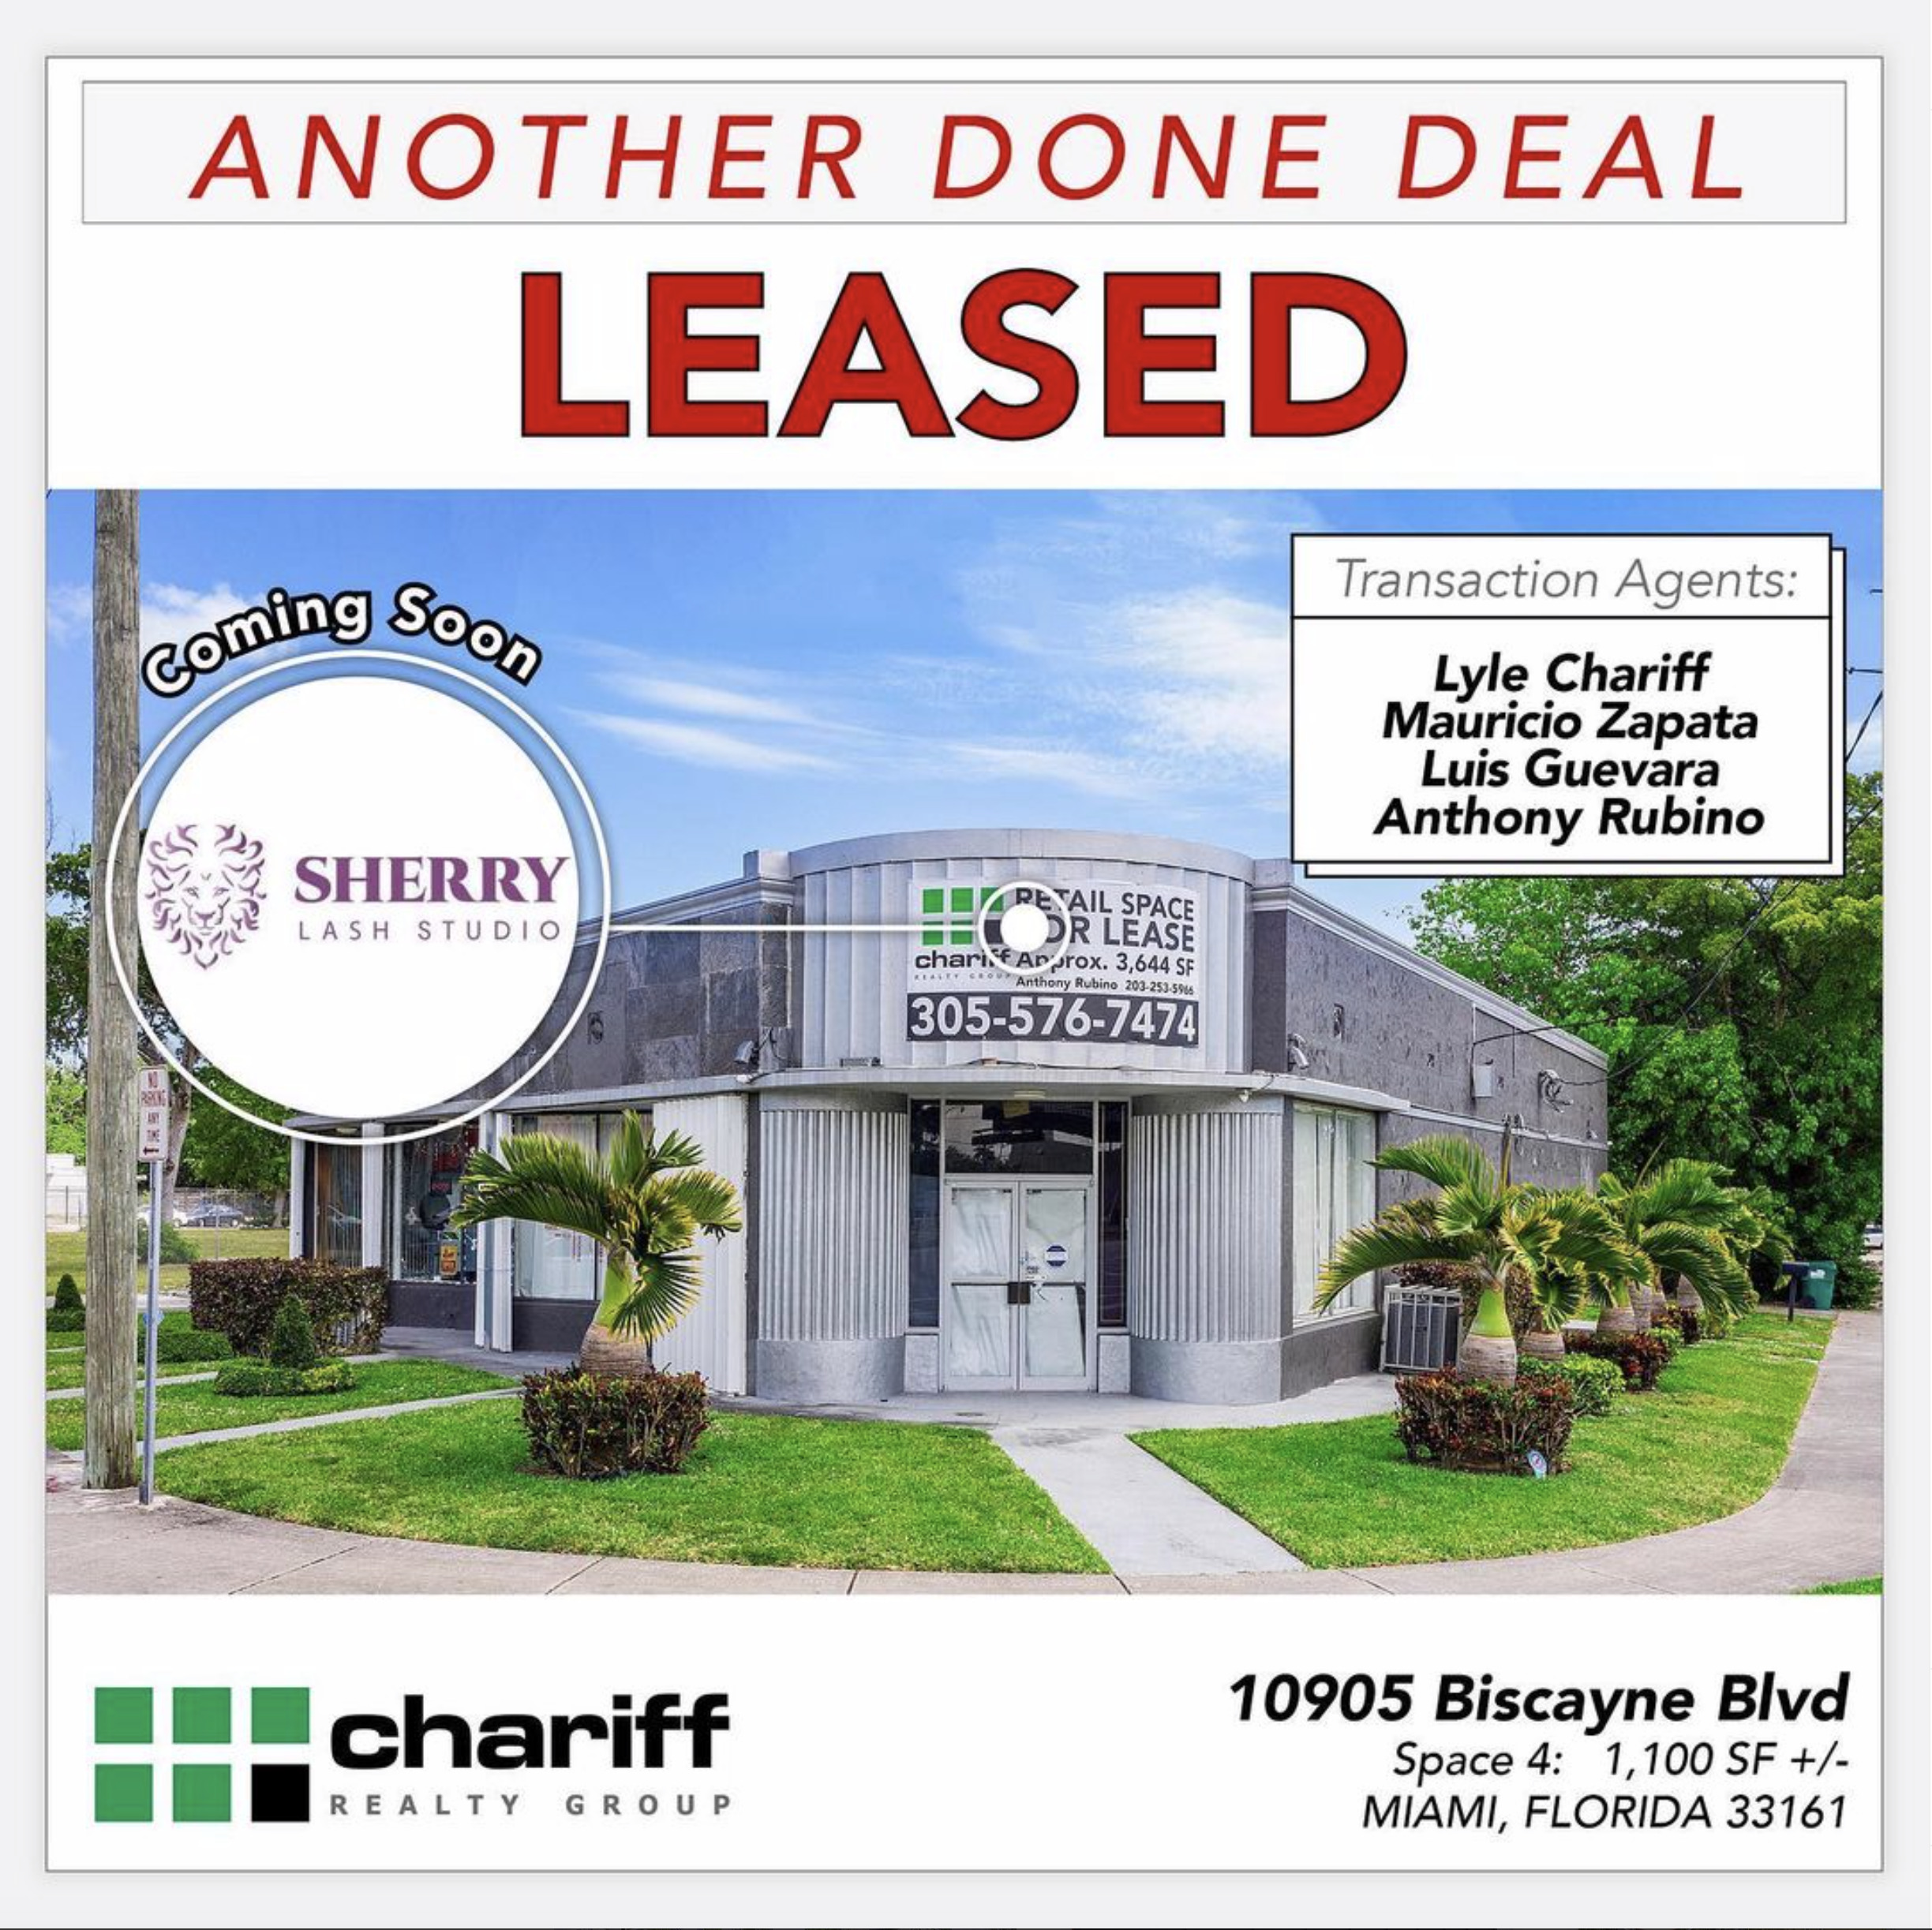 10905 Biscayne Blvd - Miami Florida - 33161 - Another Done Deal - Chariff Realty Group